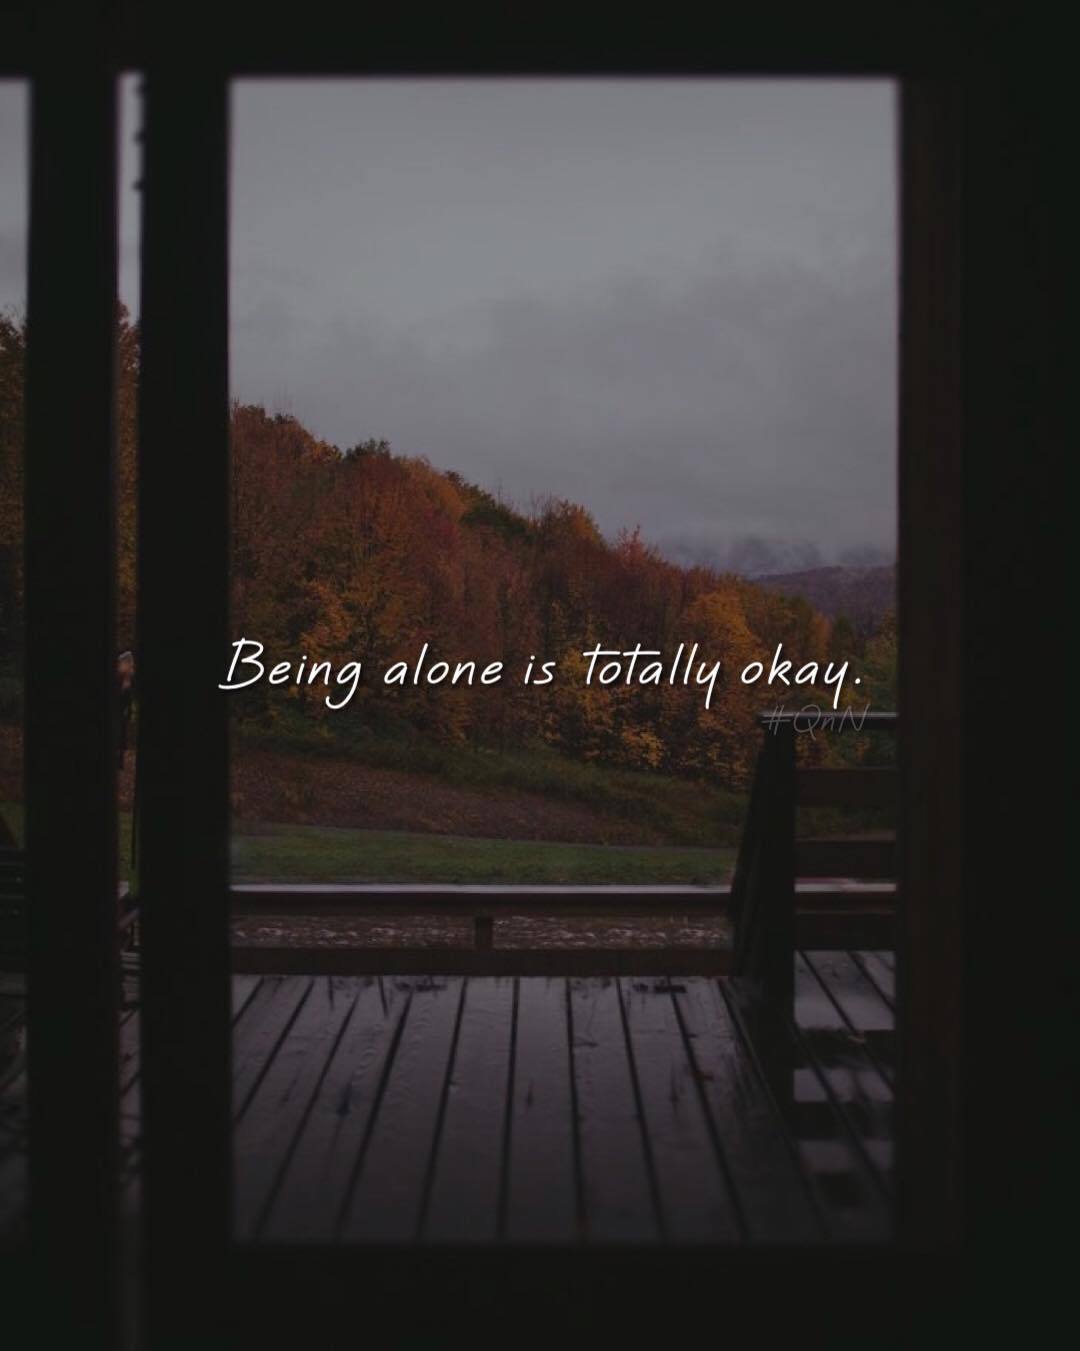 Quotes 'nd Notes - Being alone is totally okay.